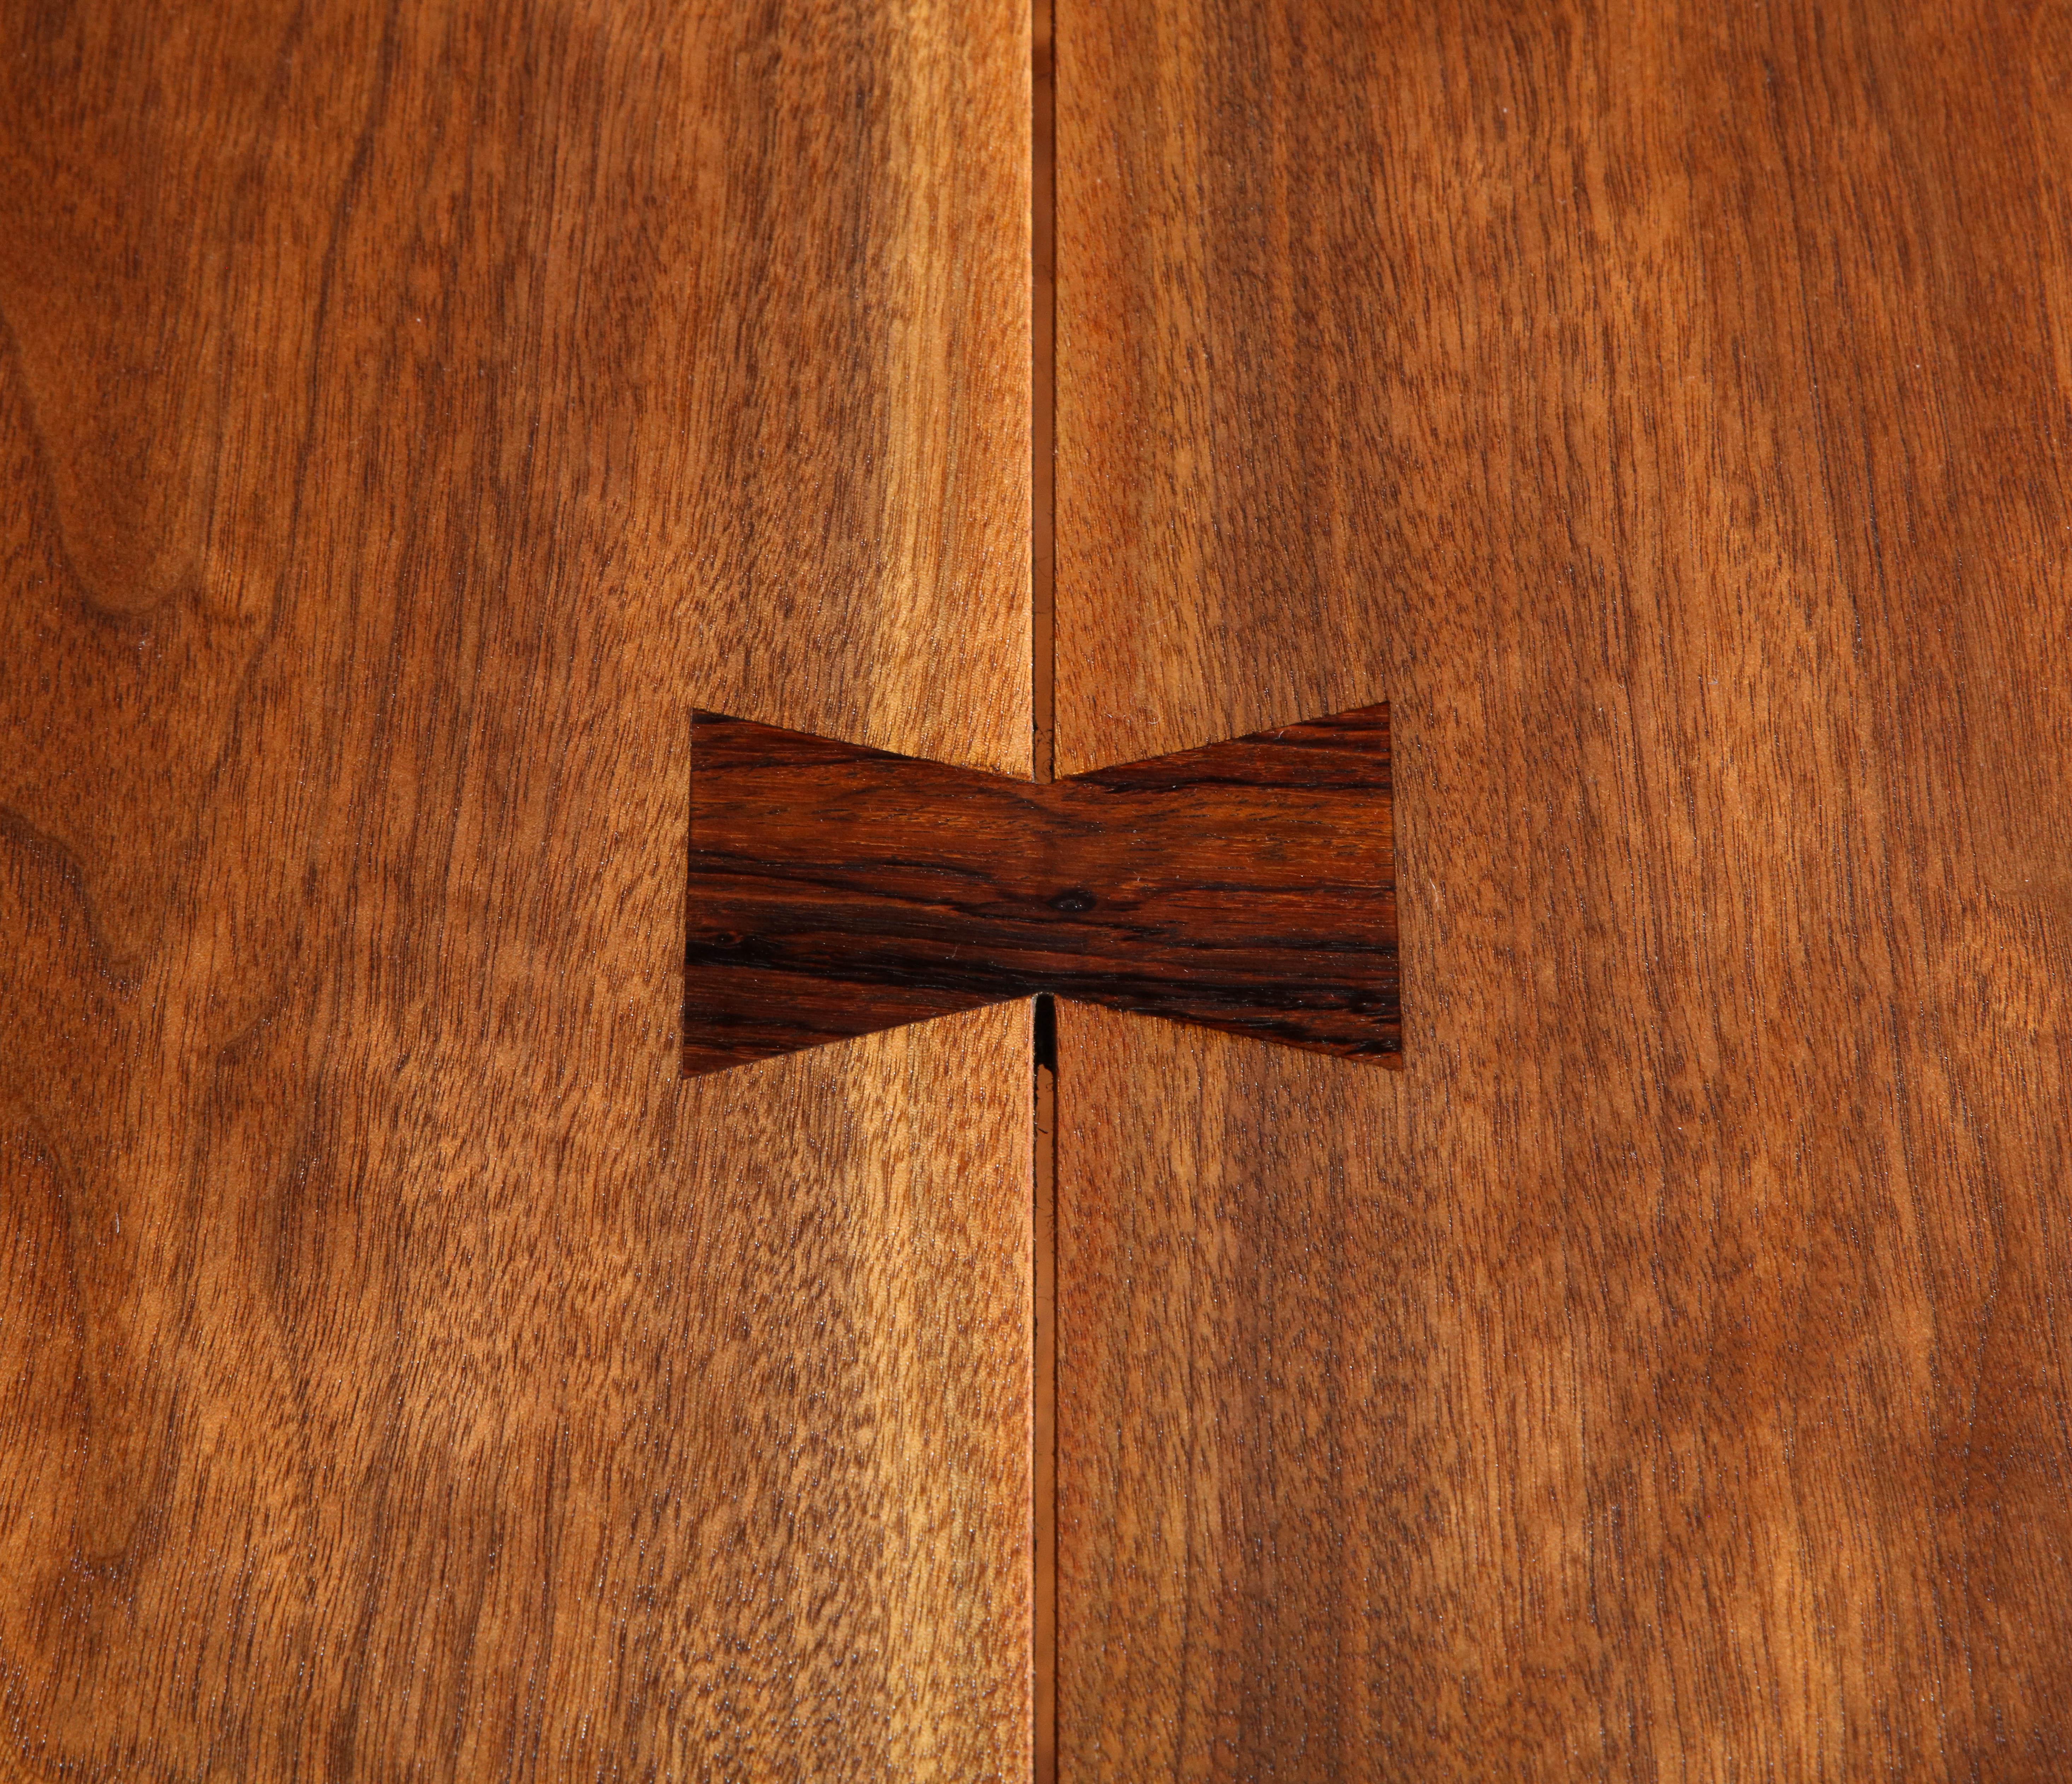 North American Superb Walnut Frenchman’s Cove Dining Table, by George Nakashima, 1967